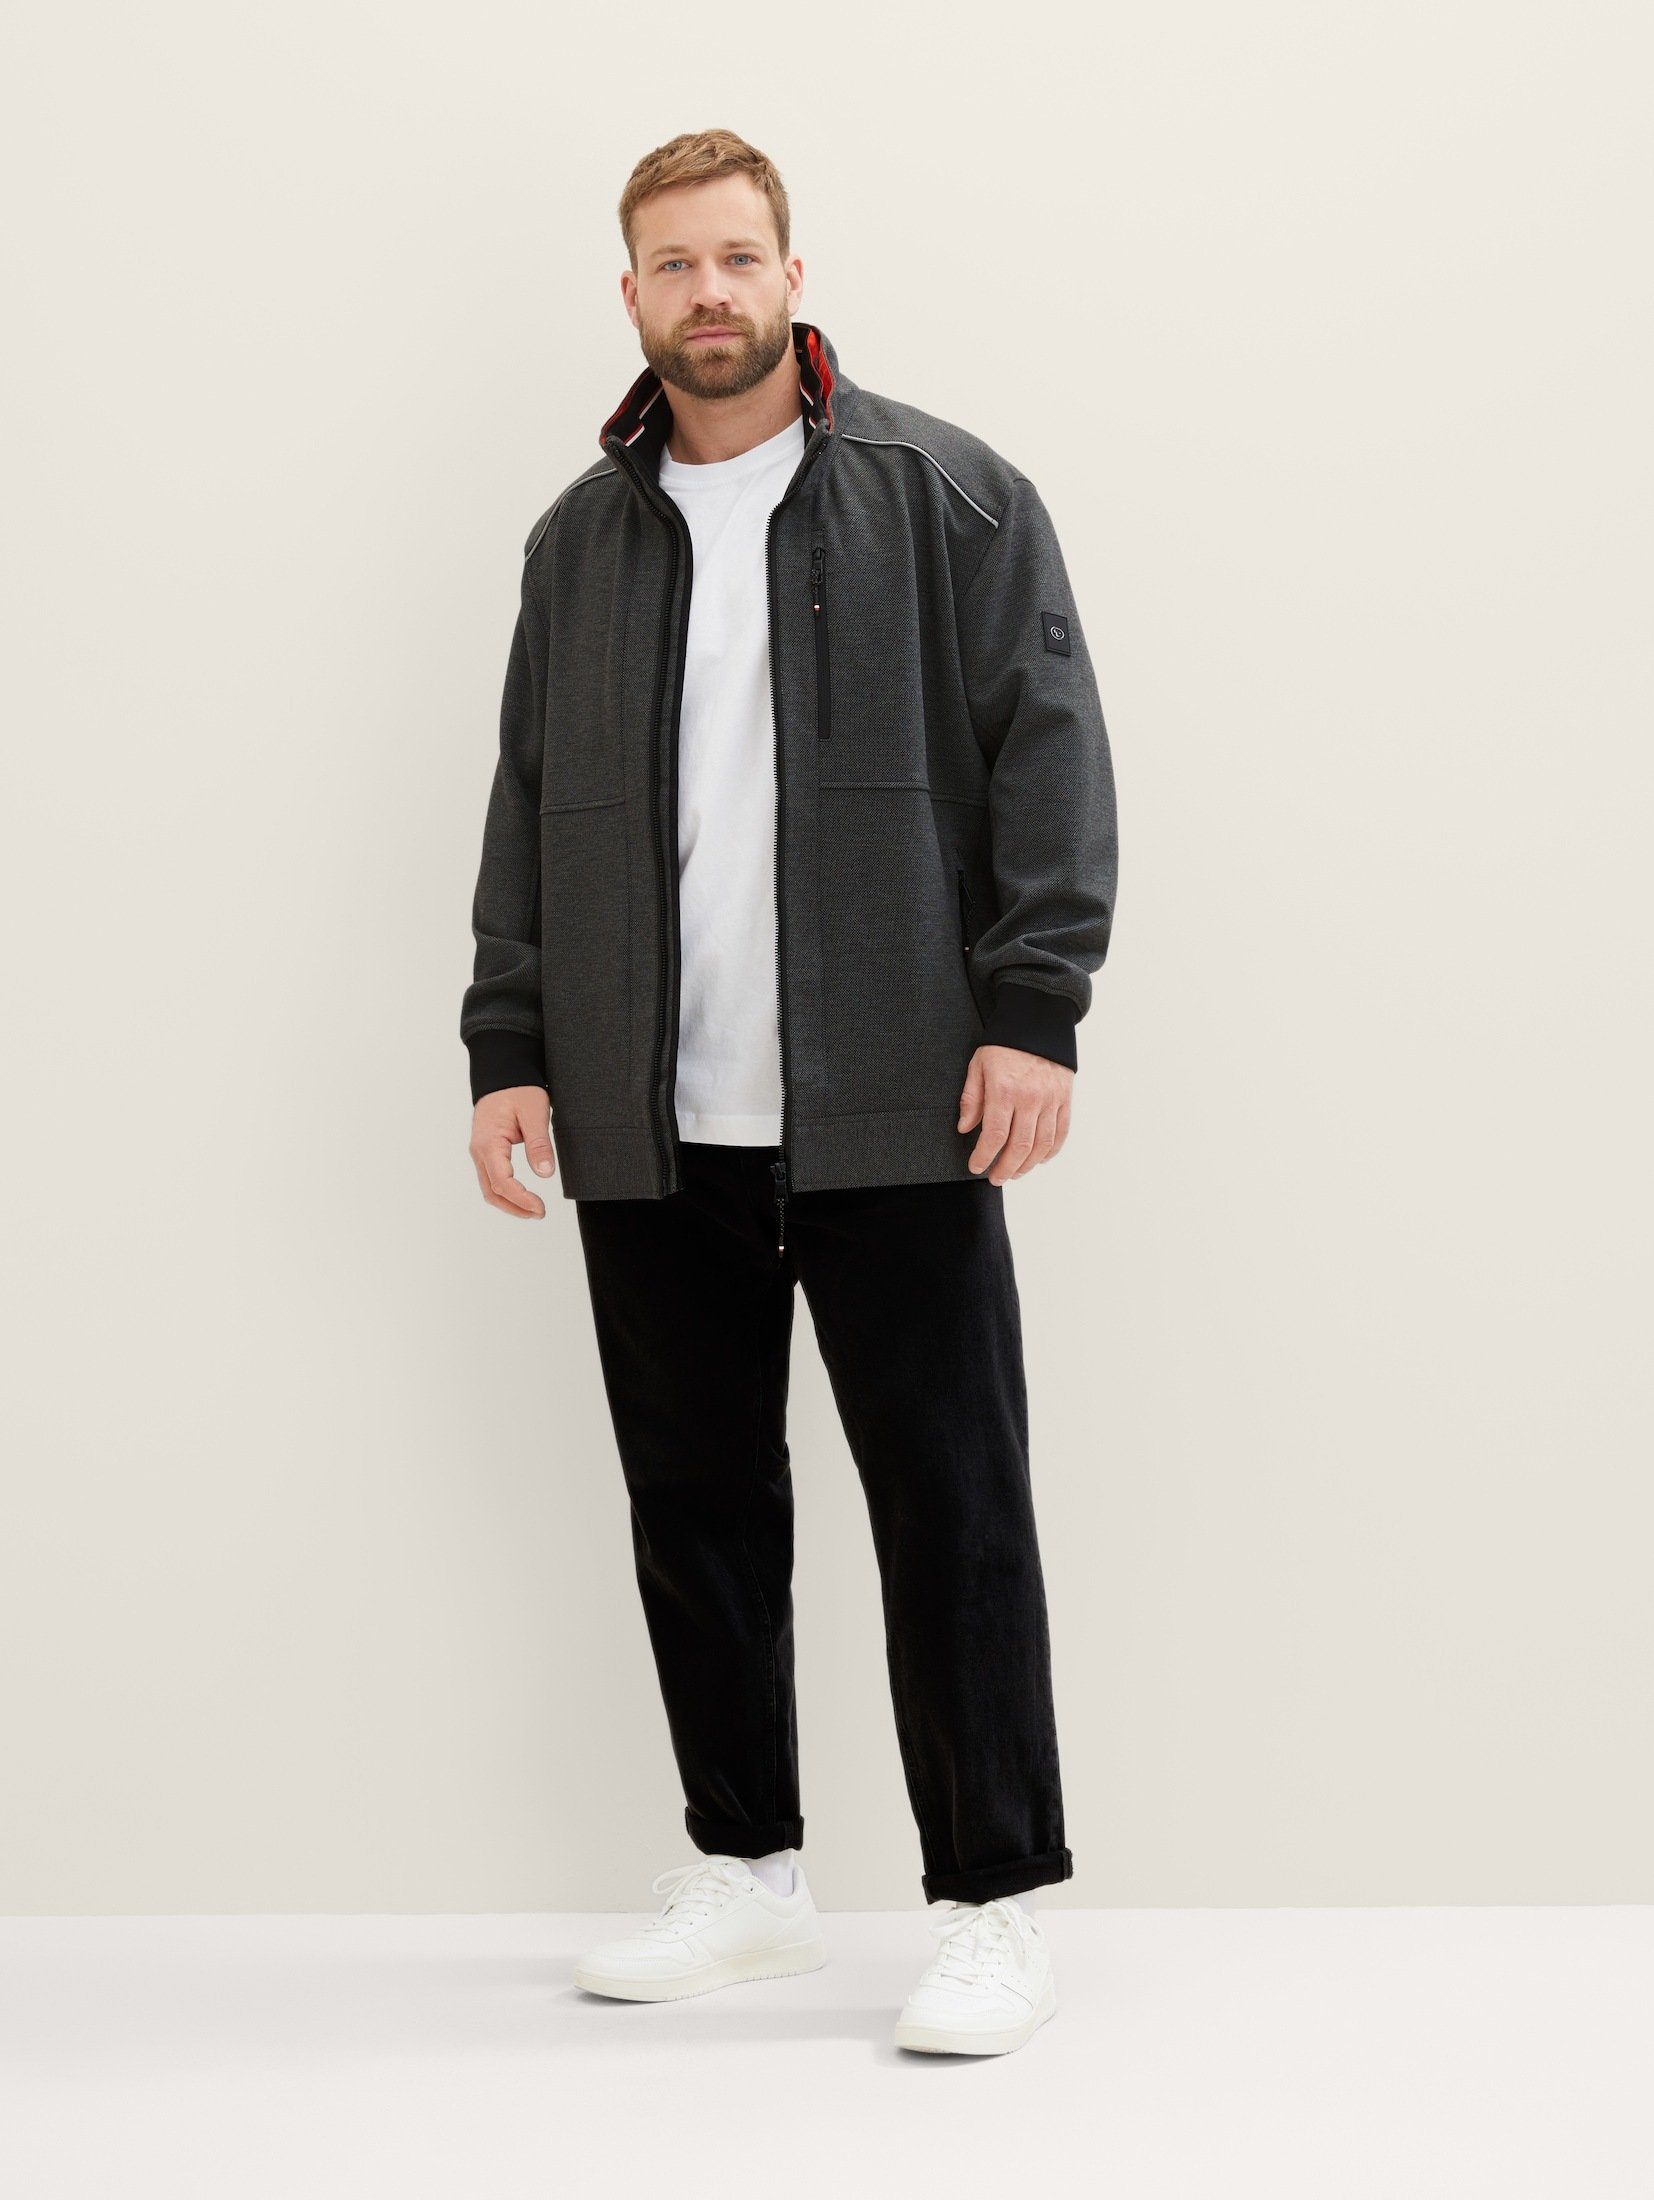 TOM TAILOR PLUS Blouson Plus - Kapuze mit structure verdeckter anthracite Jacke knitted